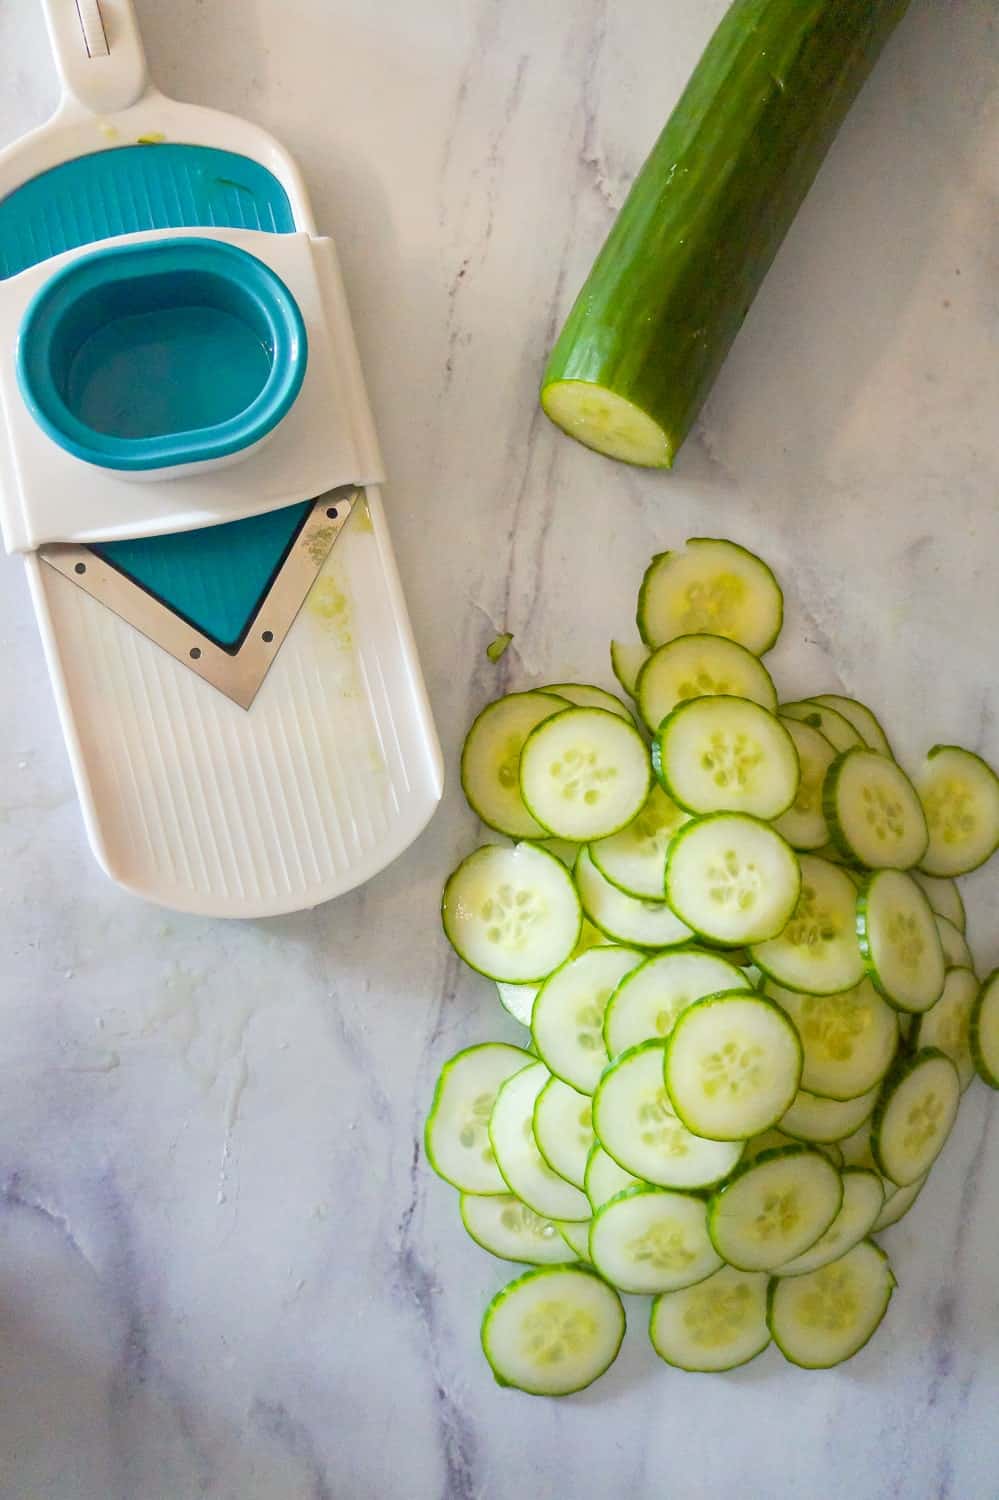 thinly sliced cucumbers next to a mandoline slicer